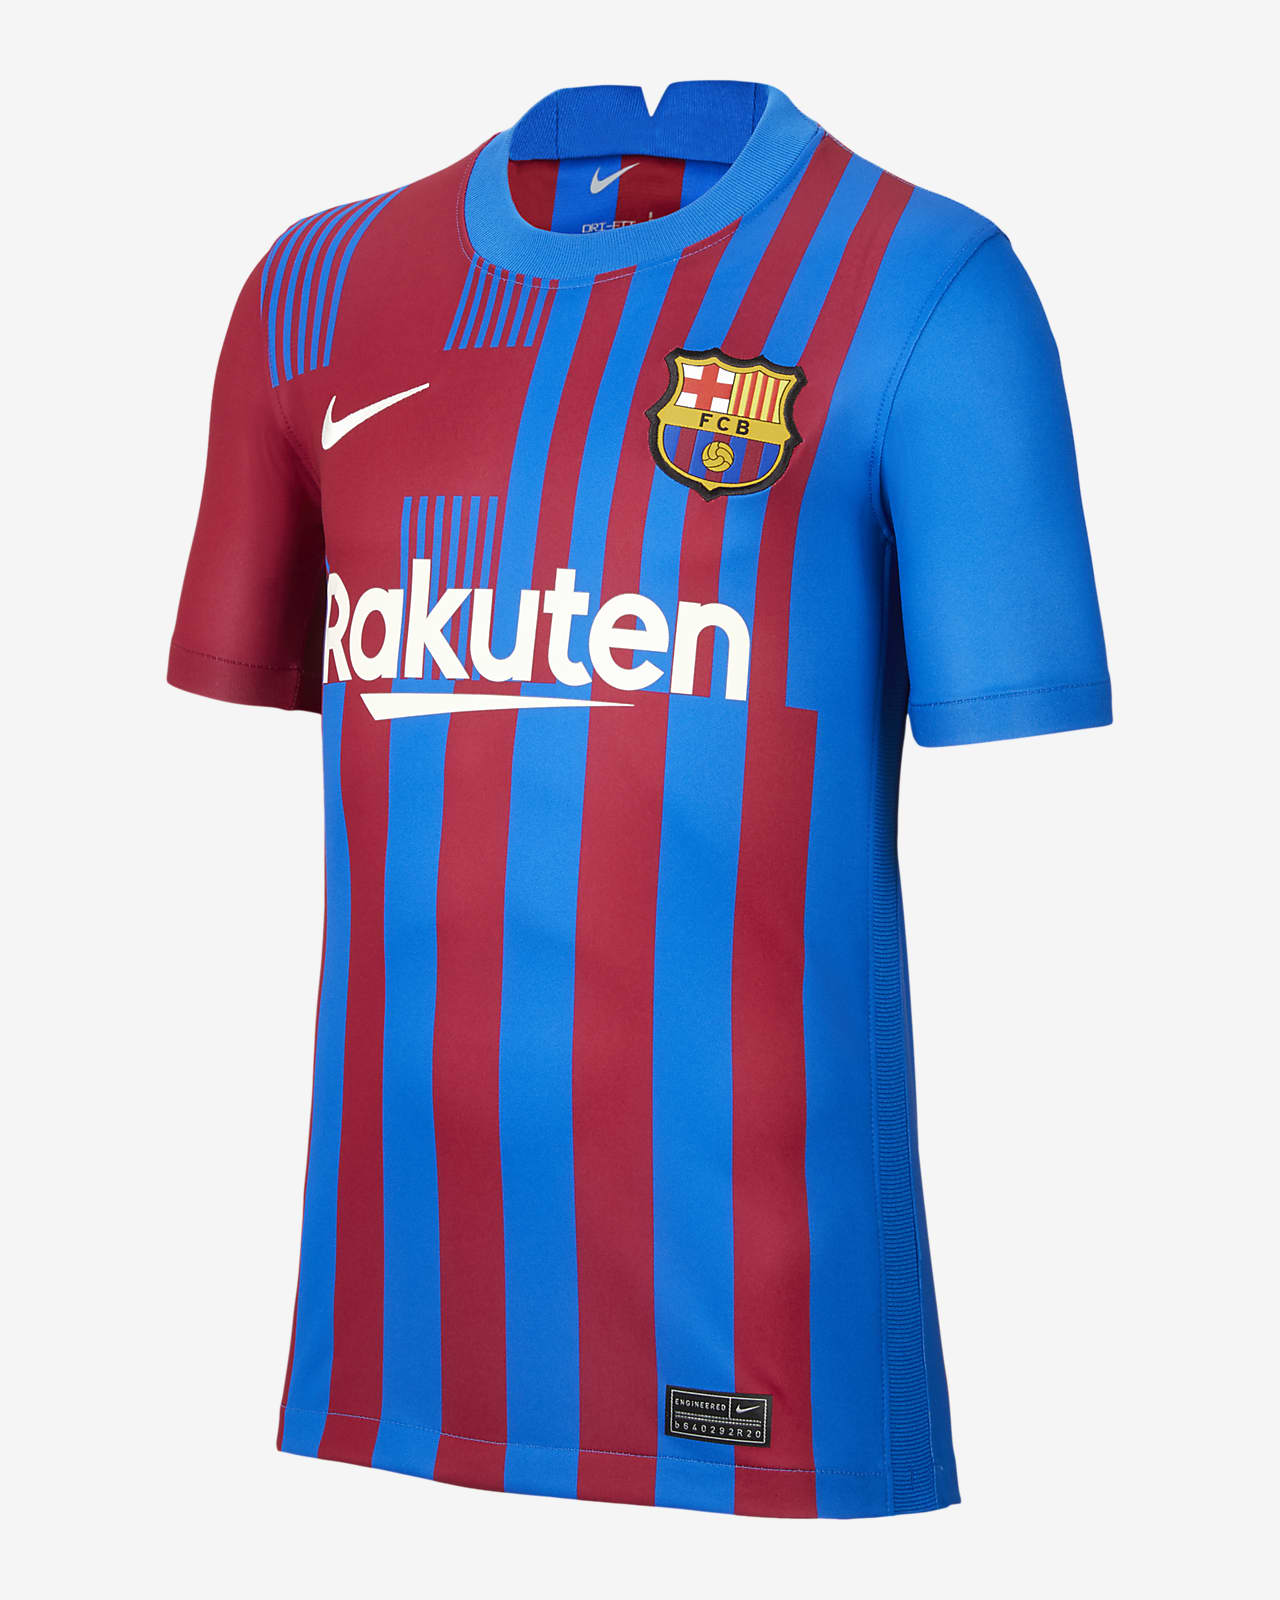 Lionel Messi Jersey For Kids | sites.unimi.it